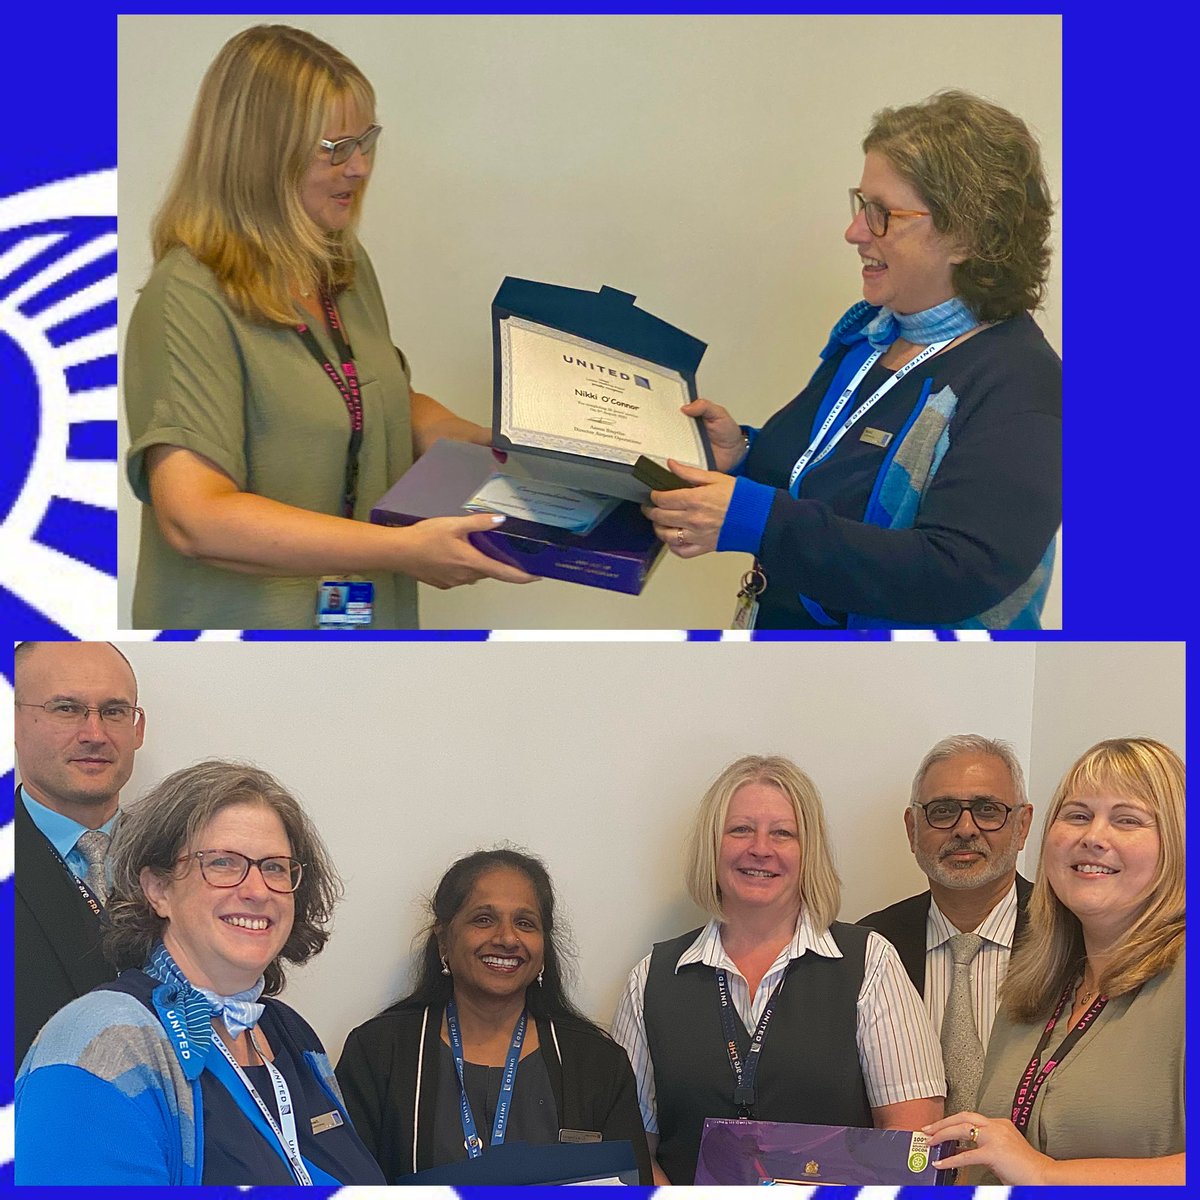 Additional Services Desk Team enjoyed an extra special Additional Service @United LHR, in helping to celebrate their colleagues Milestone. Nikki receives her 25 year Award from @LucyGUnited, celebrating with her team & all of us at LHR. @aaronsmythe @weareunited #beingunited